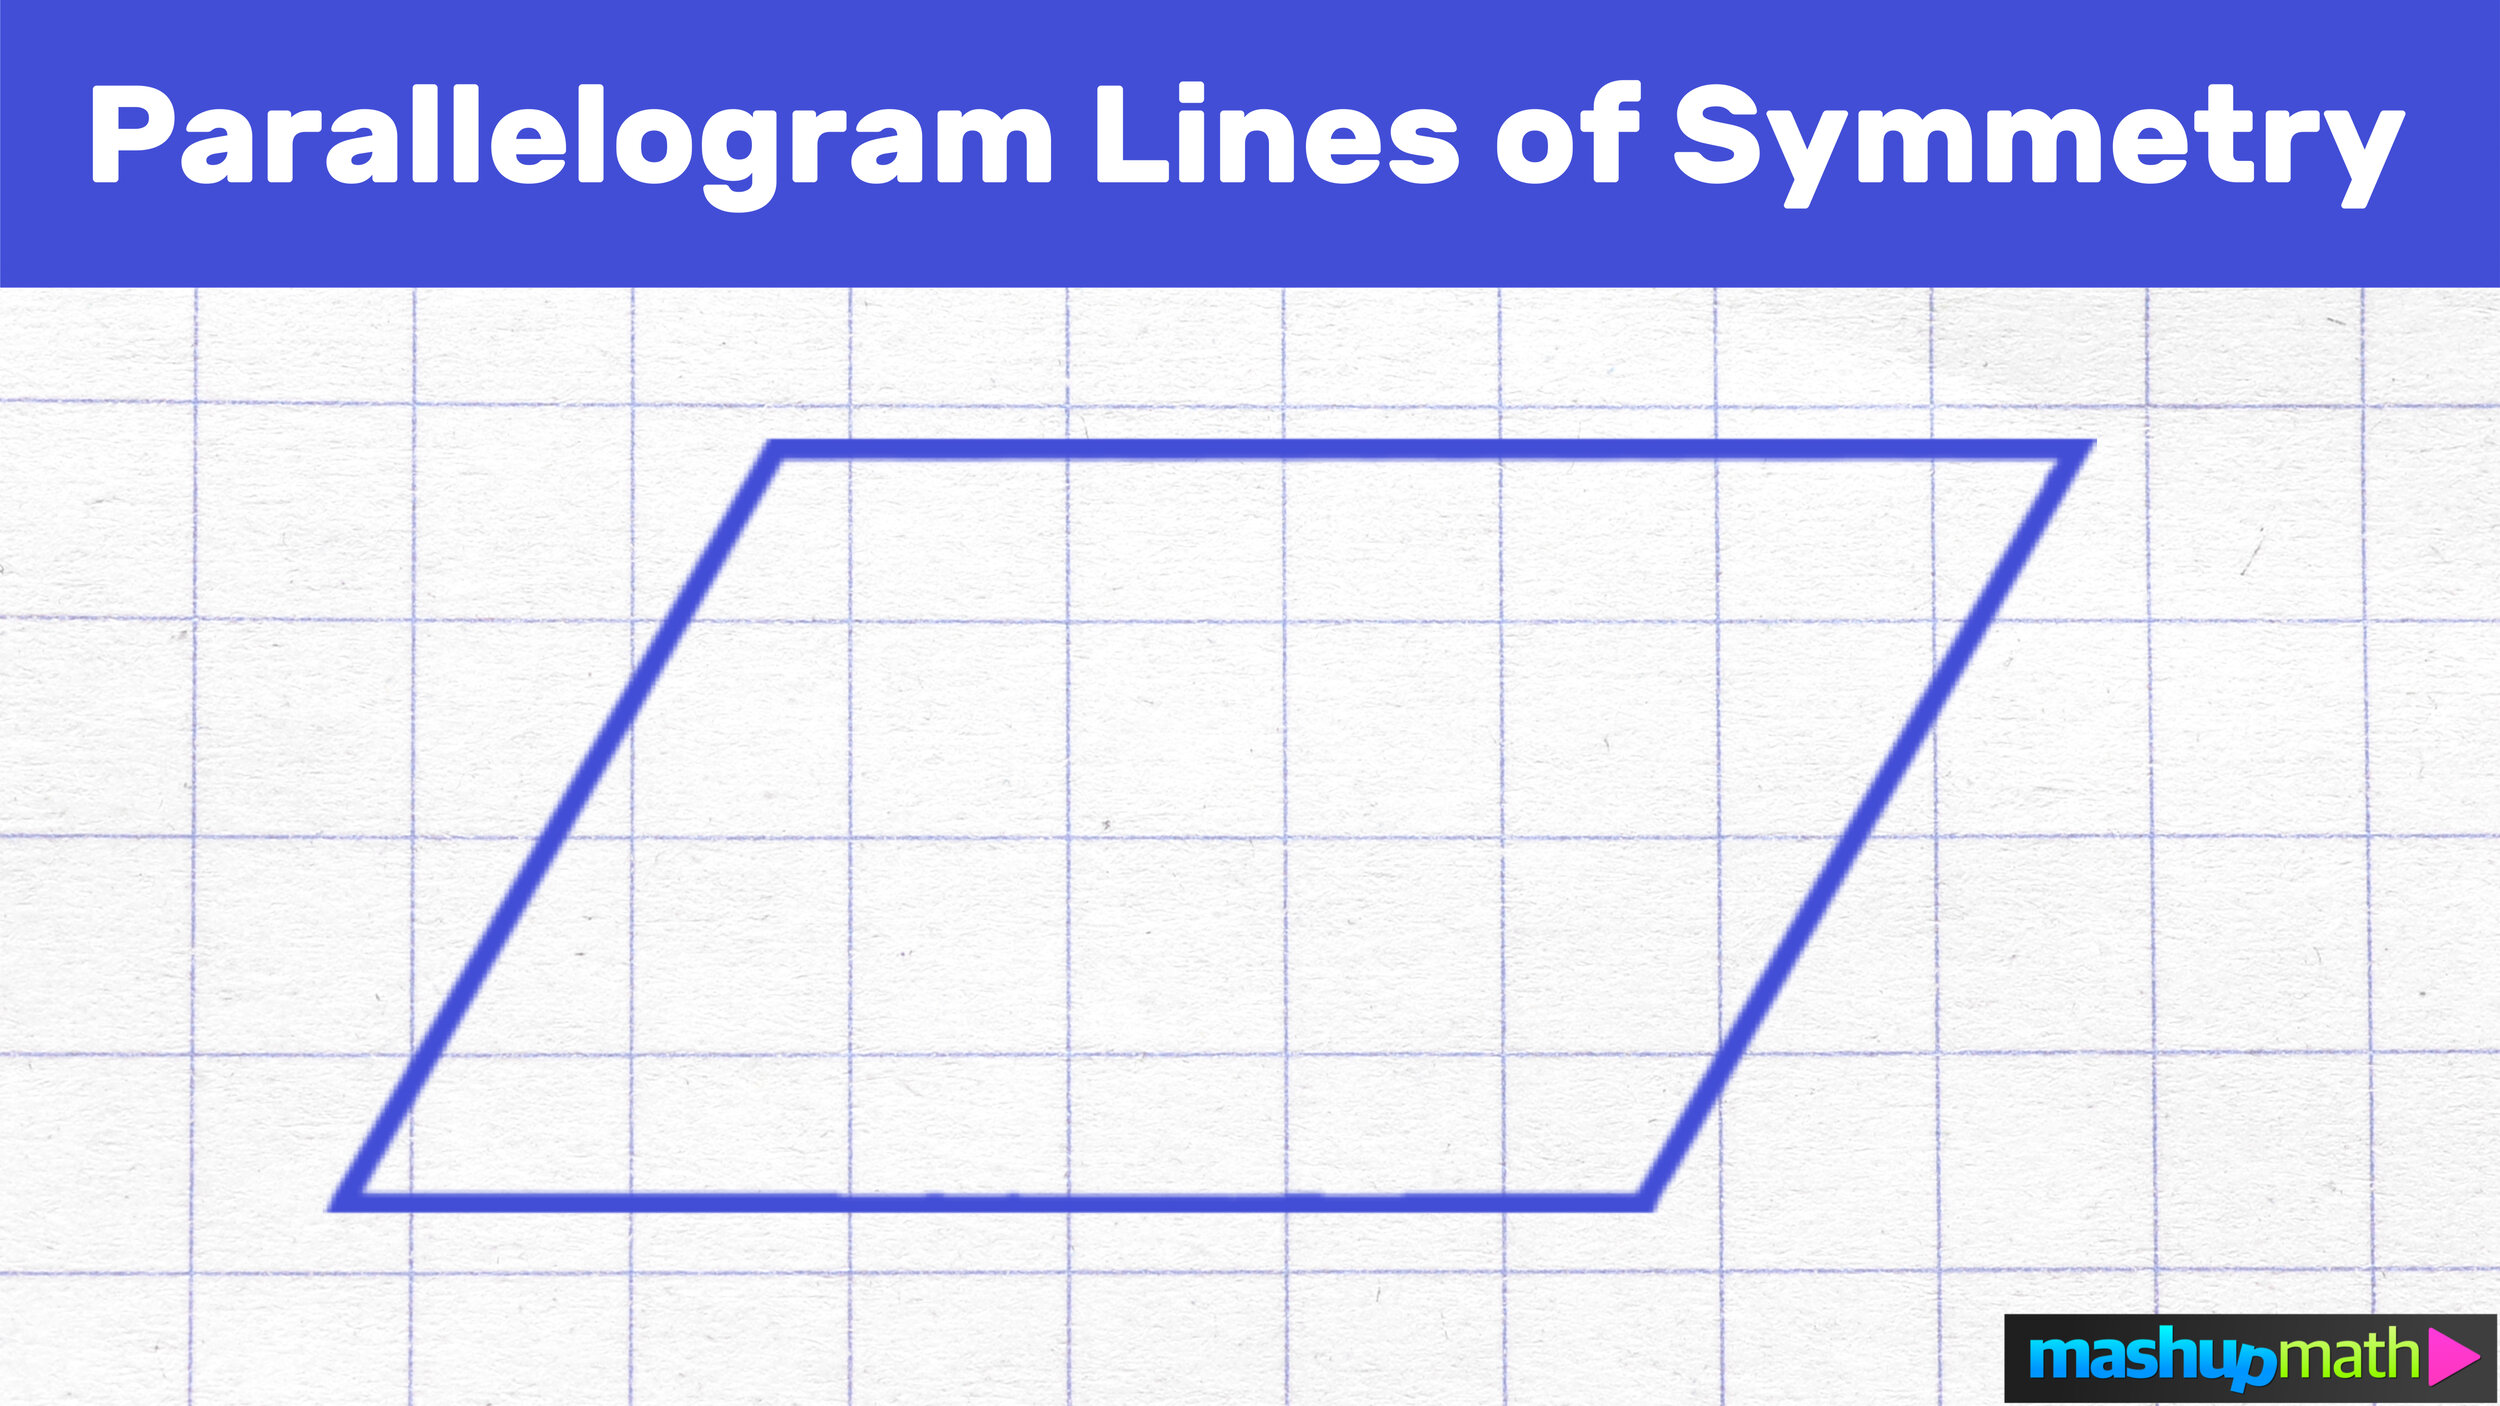 Symmetry - Definition, Types, Line of Symmetry in Geometry and